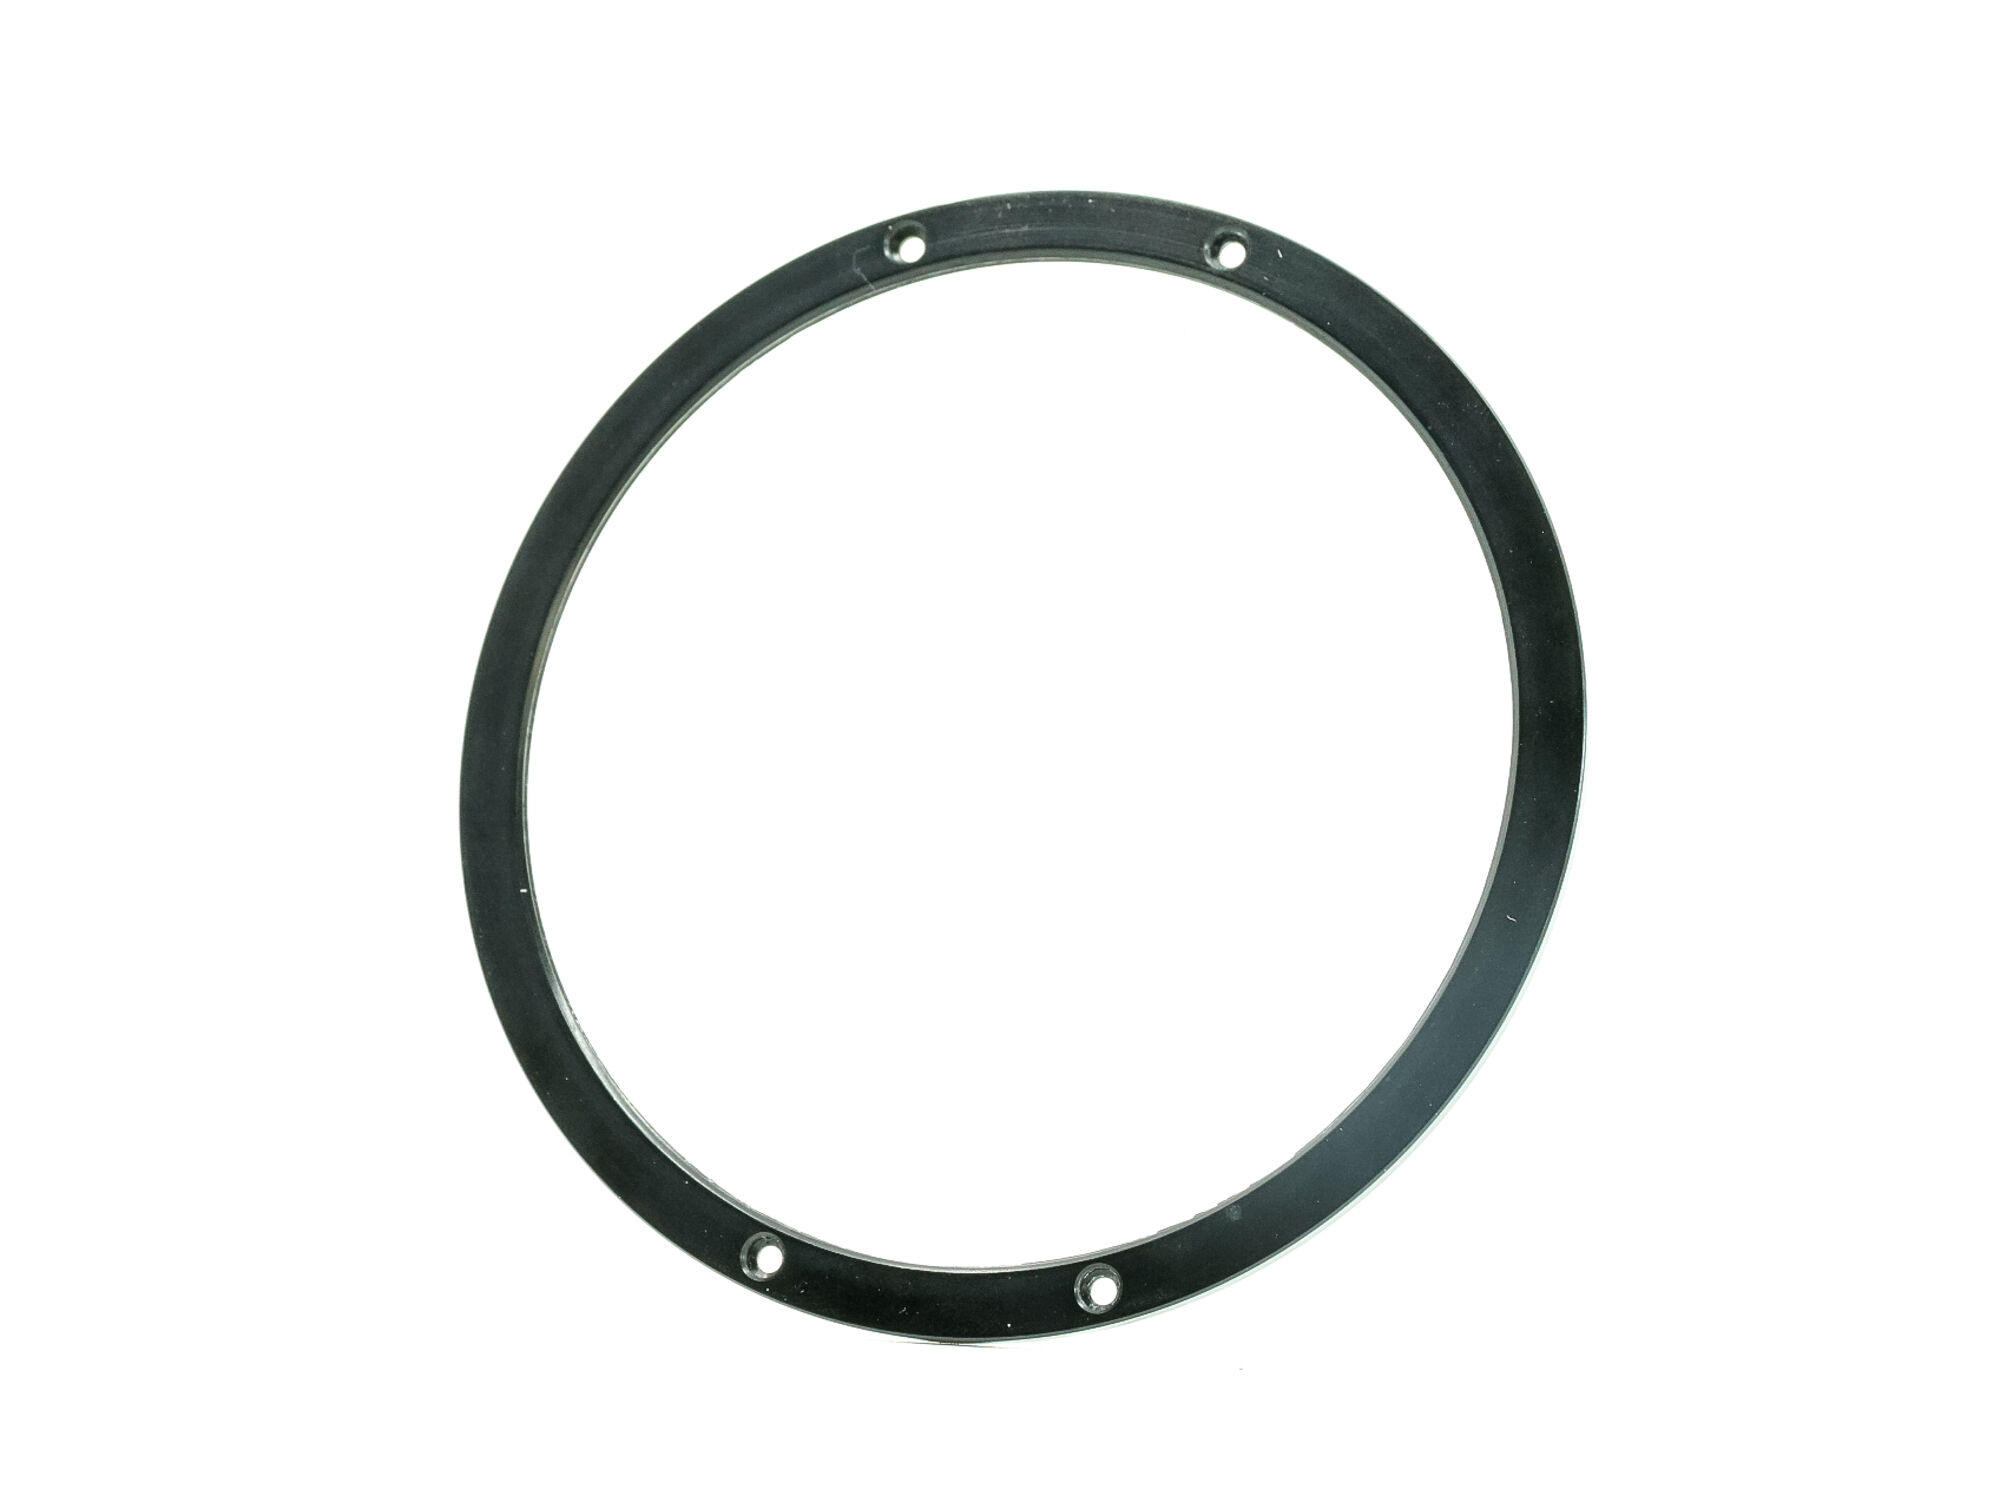 lee 105mm adapter ring (condition: like new)